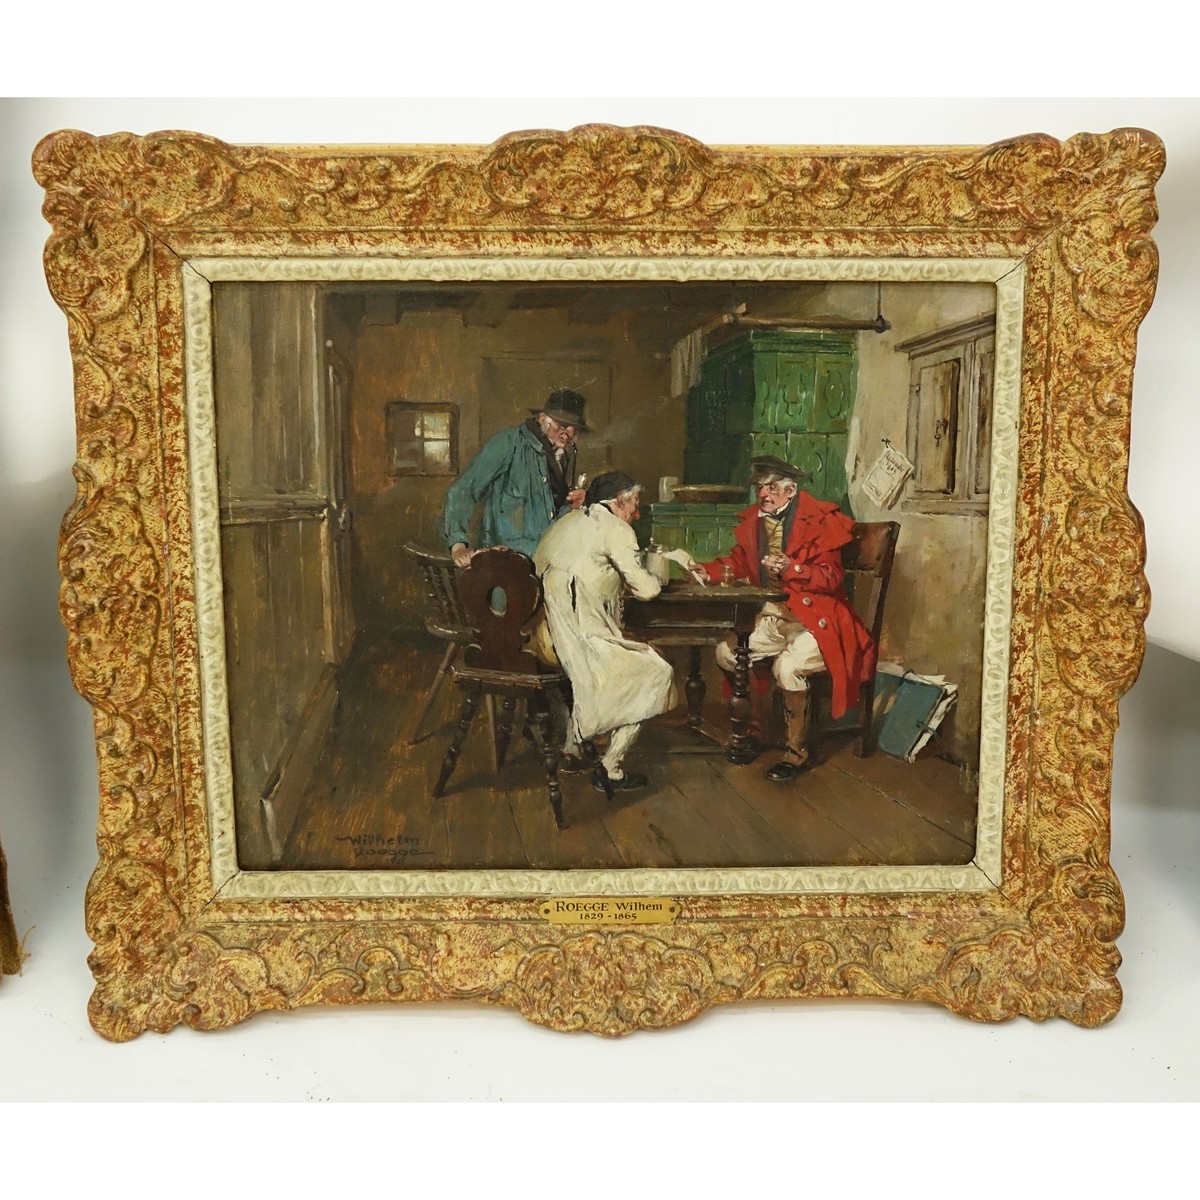 Wilhelm Roegge I, German  (1829 - 1908) Oil on Board, Interior Scene with Figures, Signed Lower Left. Tag with artist name and date attached to frame.